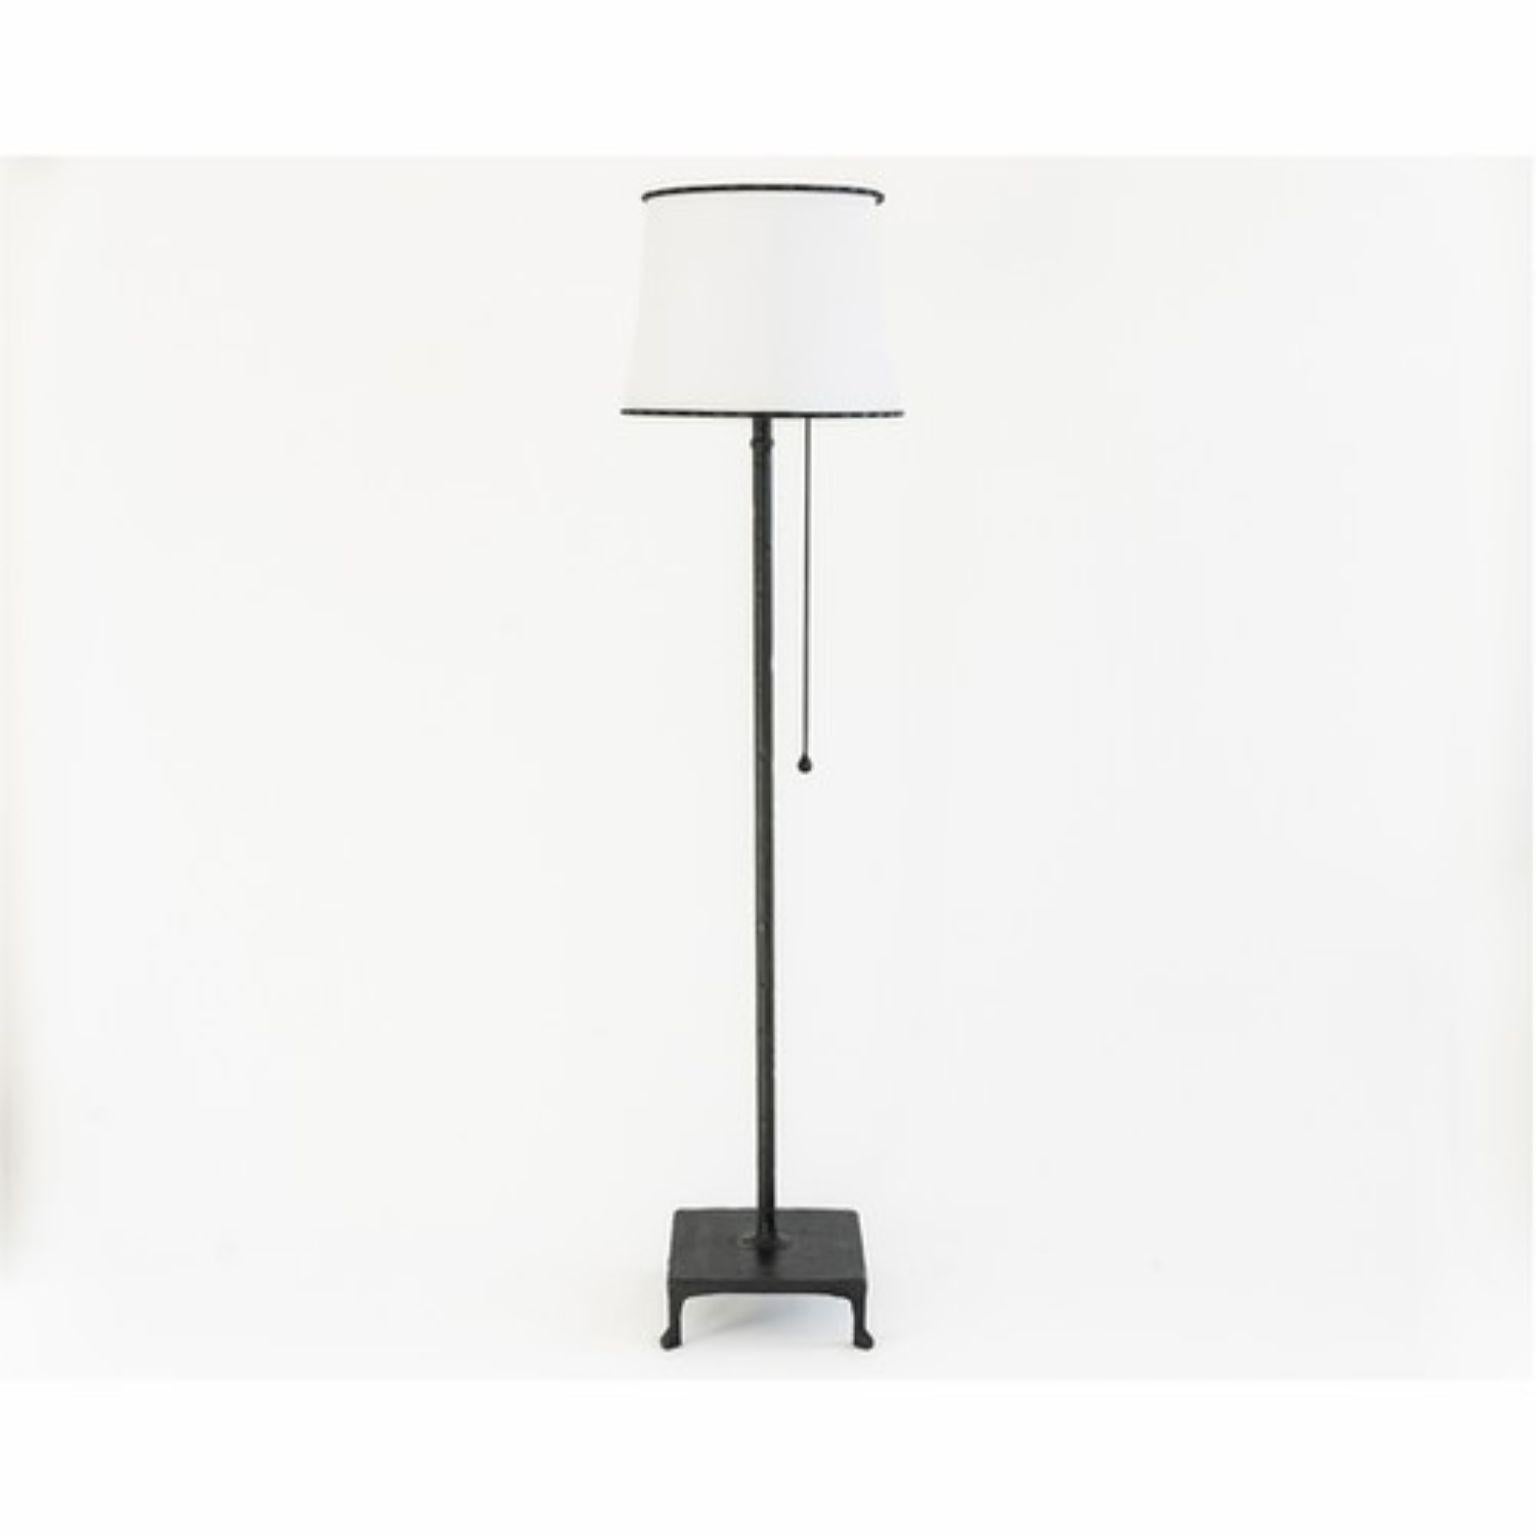 Floor lamp no. 1 by JM Szymanski
Materials: Blackened steel, waxed finish, parchment shade
Dimensions: Square base 33 x W 45.7 x H 185 cm  
 
A simple hand carved steel floor lamp with a parchment shade.

Jake Szymanski lives and designs in